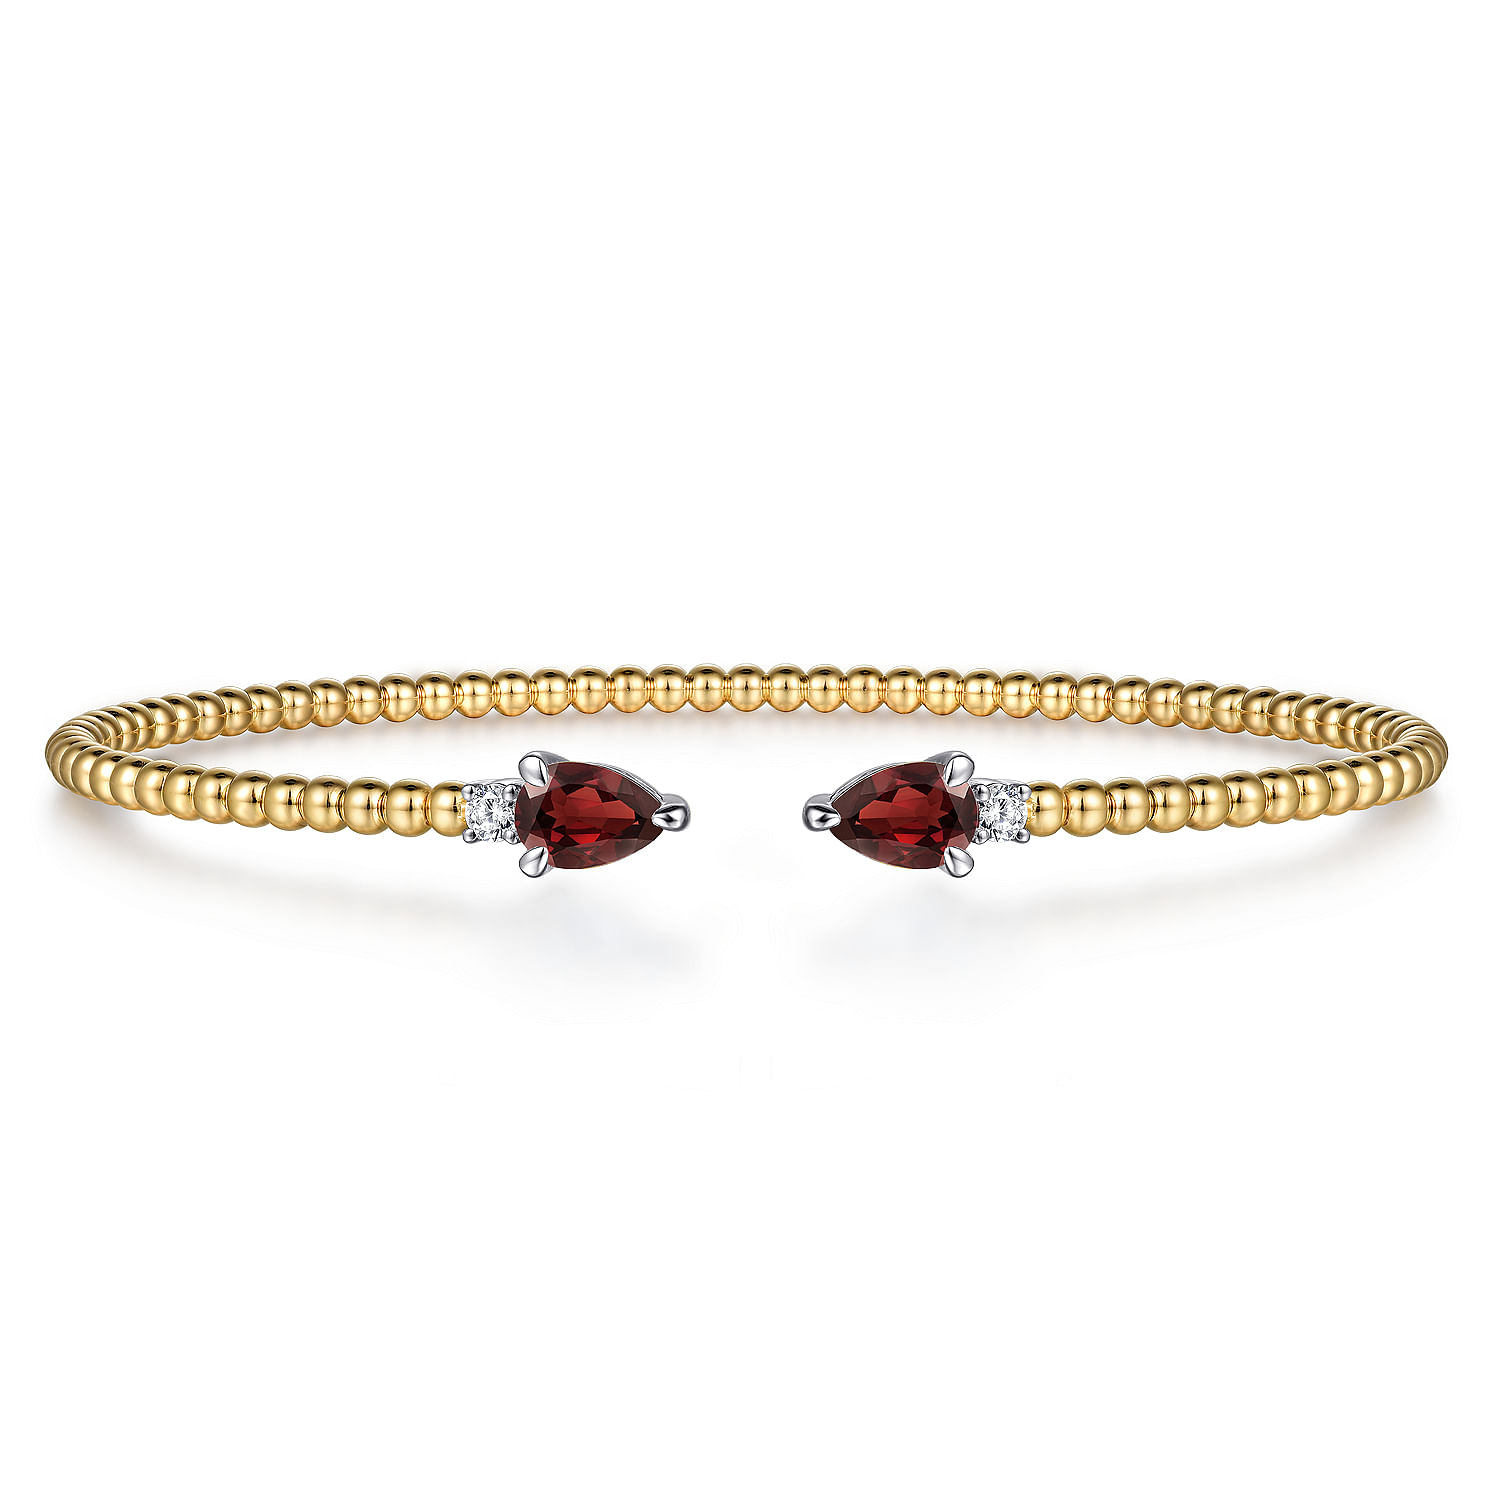 14K White & Yellow Gold Bujukan Open Cuff Bracelet with Garnet and Diamond End Caps